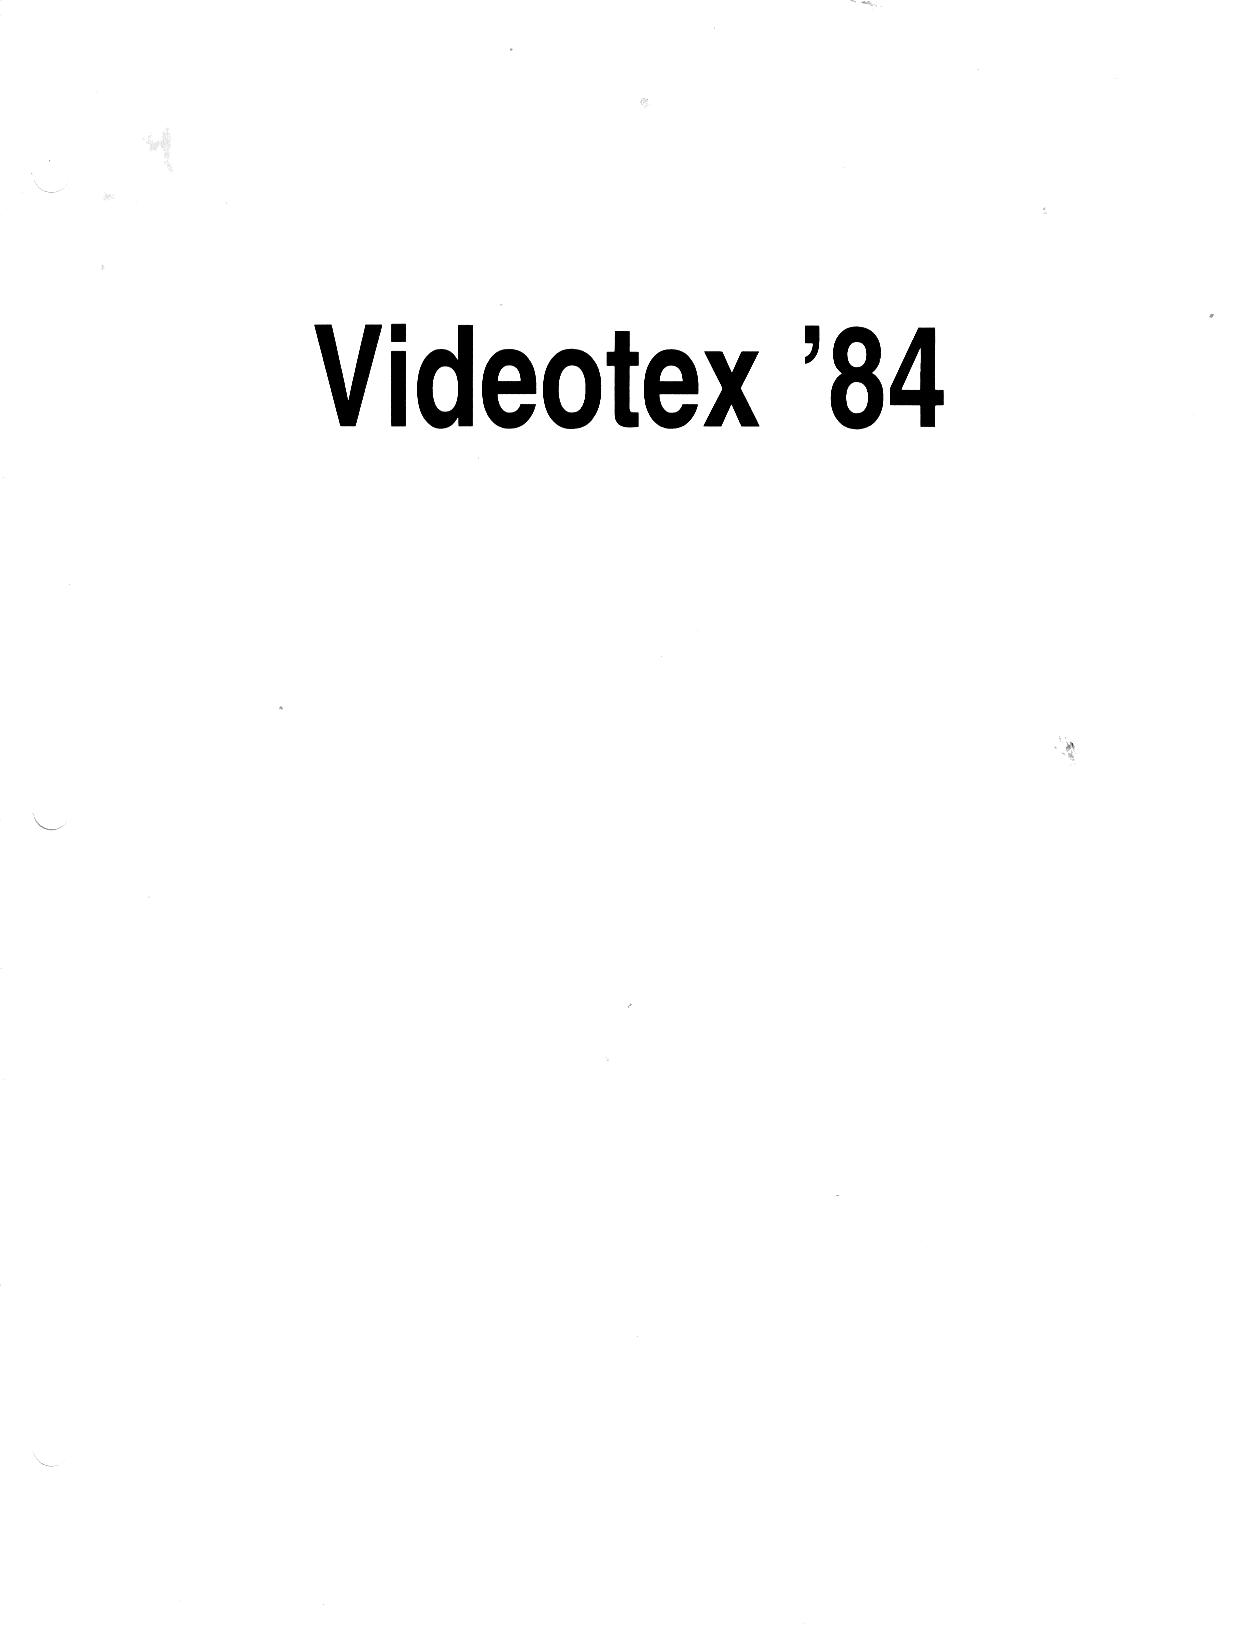 Videotex '84 Proceedings - Cover Page